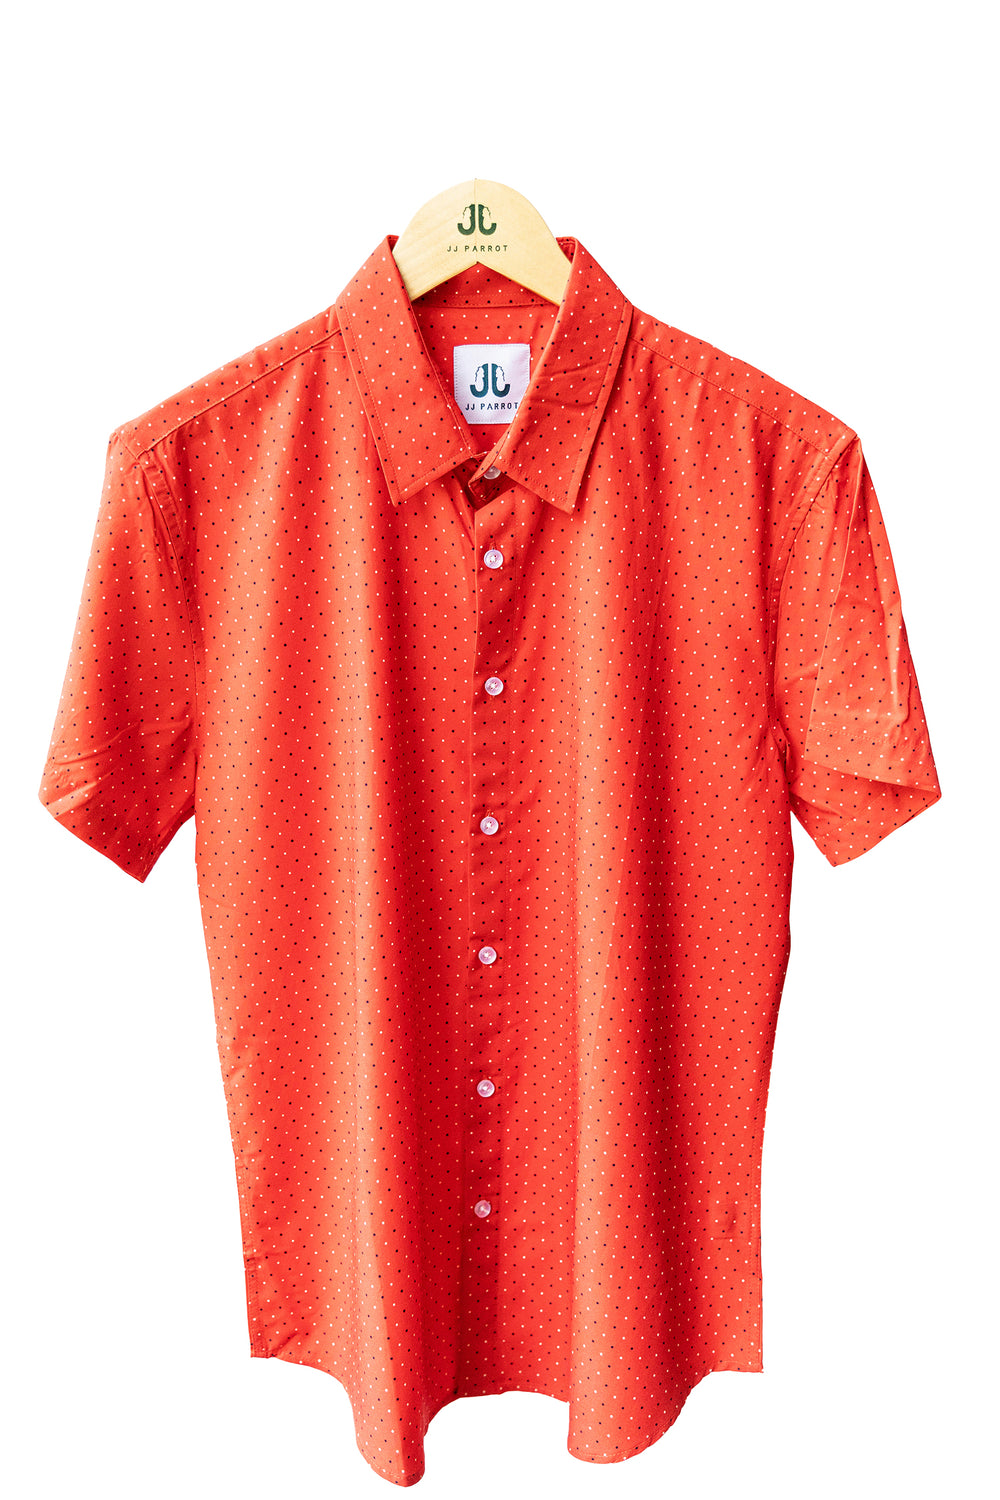 Red Polka Dot Short Sleeve Button Down